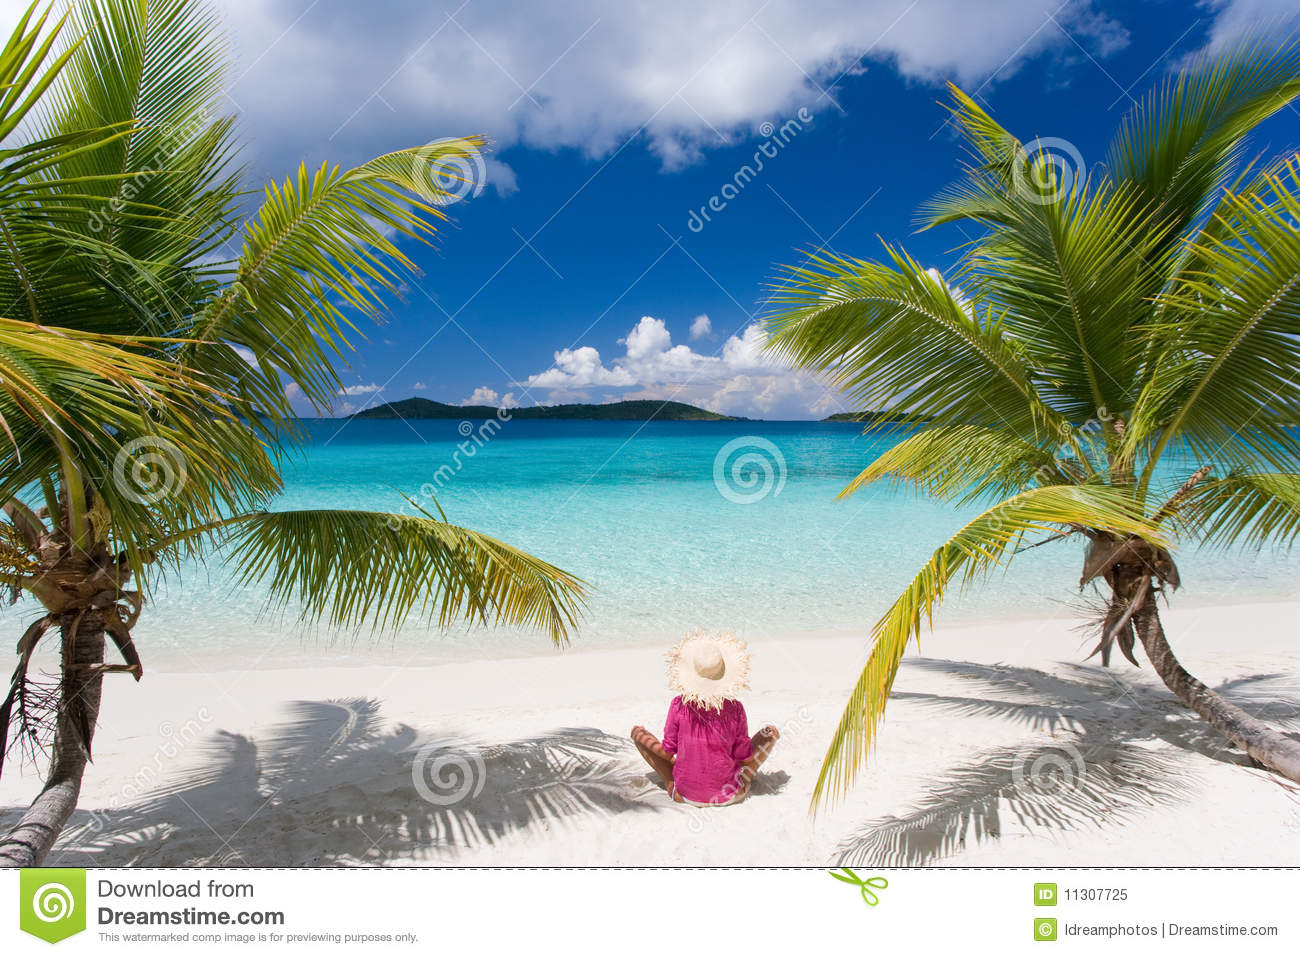 Woman Tropical Beach Palm Trees Royalty Free Stock Photo   Image